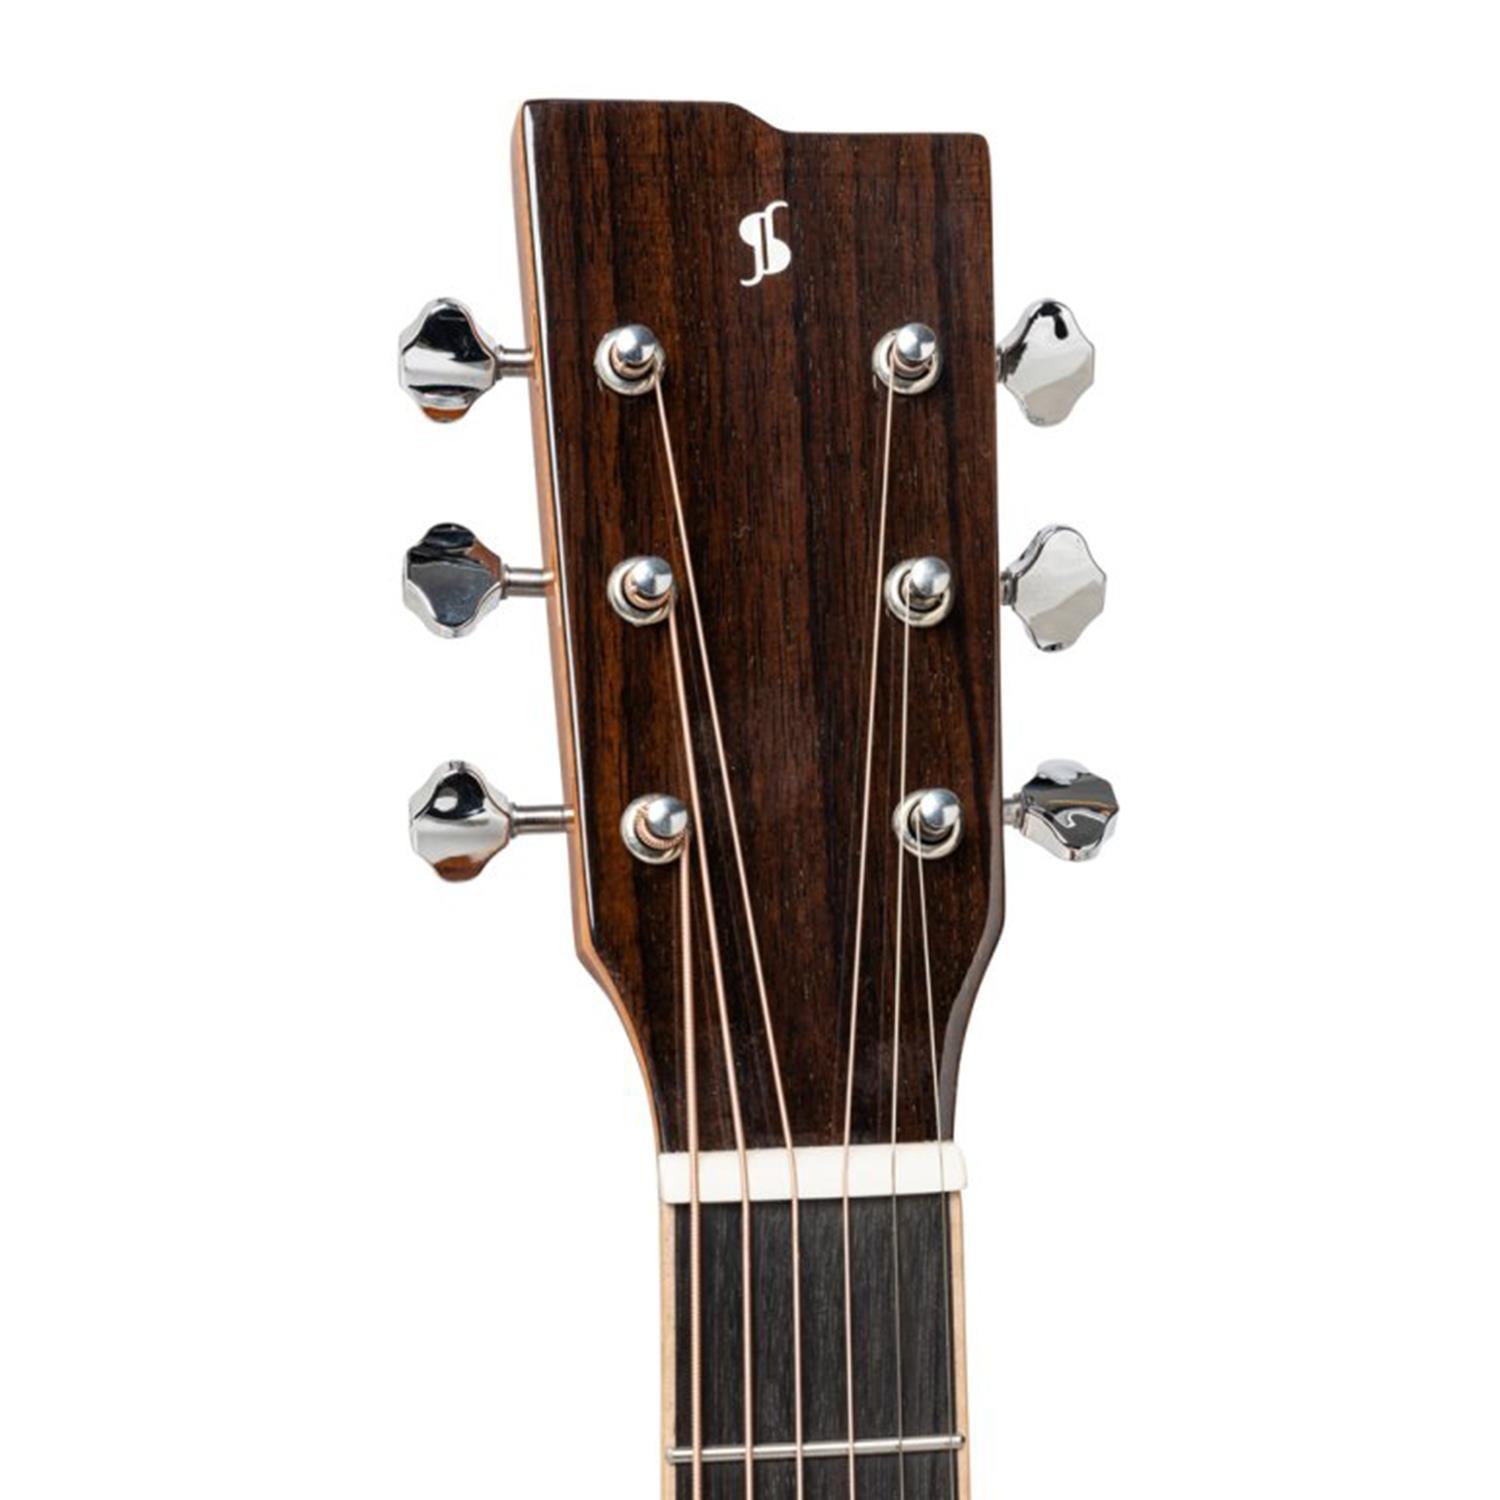 Stagg SA45 D-LW Series 45 Natural Dreadnought Acoustic Guitar with Spruce Top - DY Pro Audio